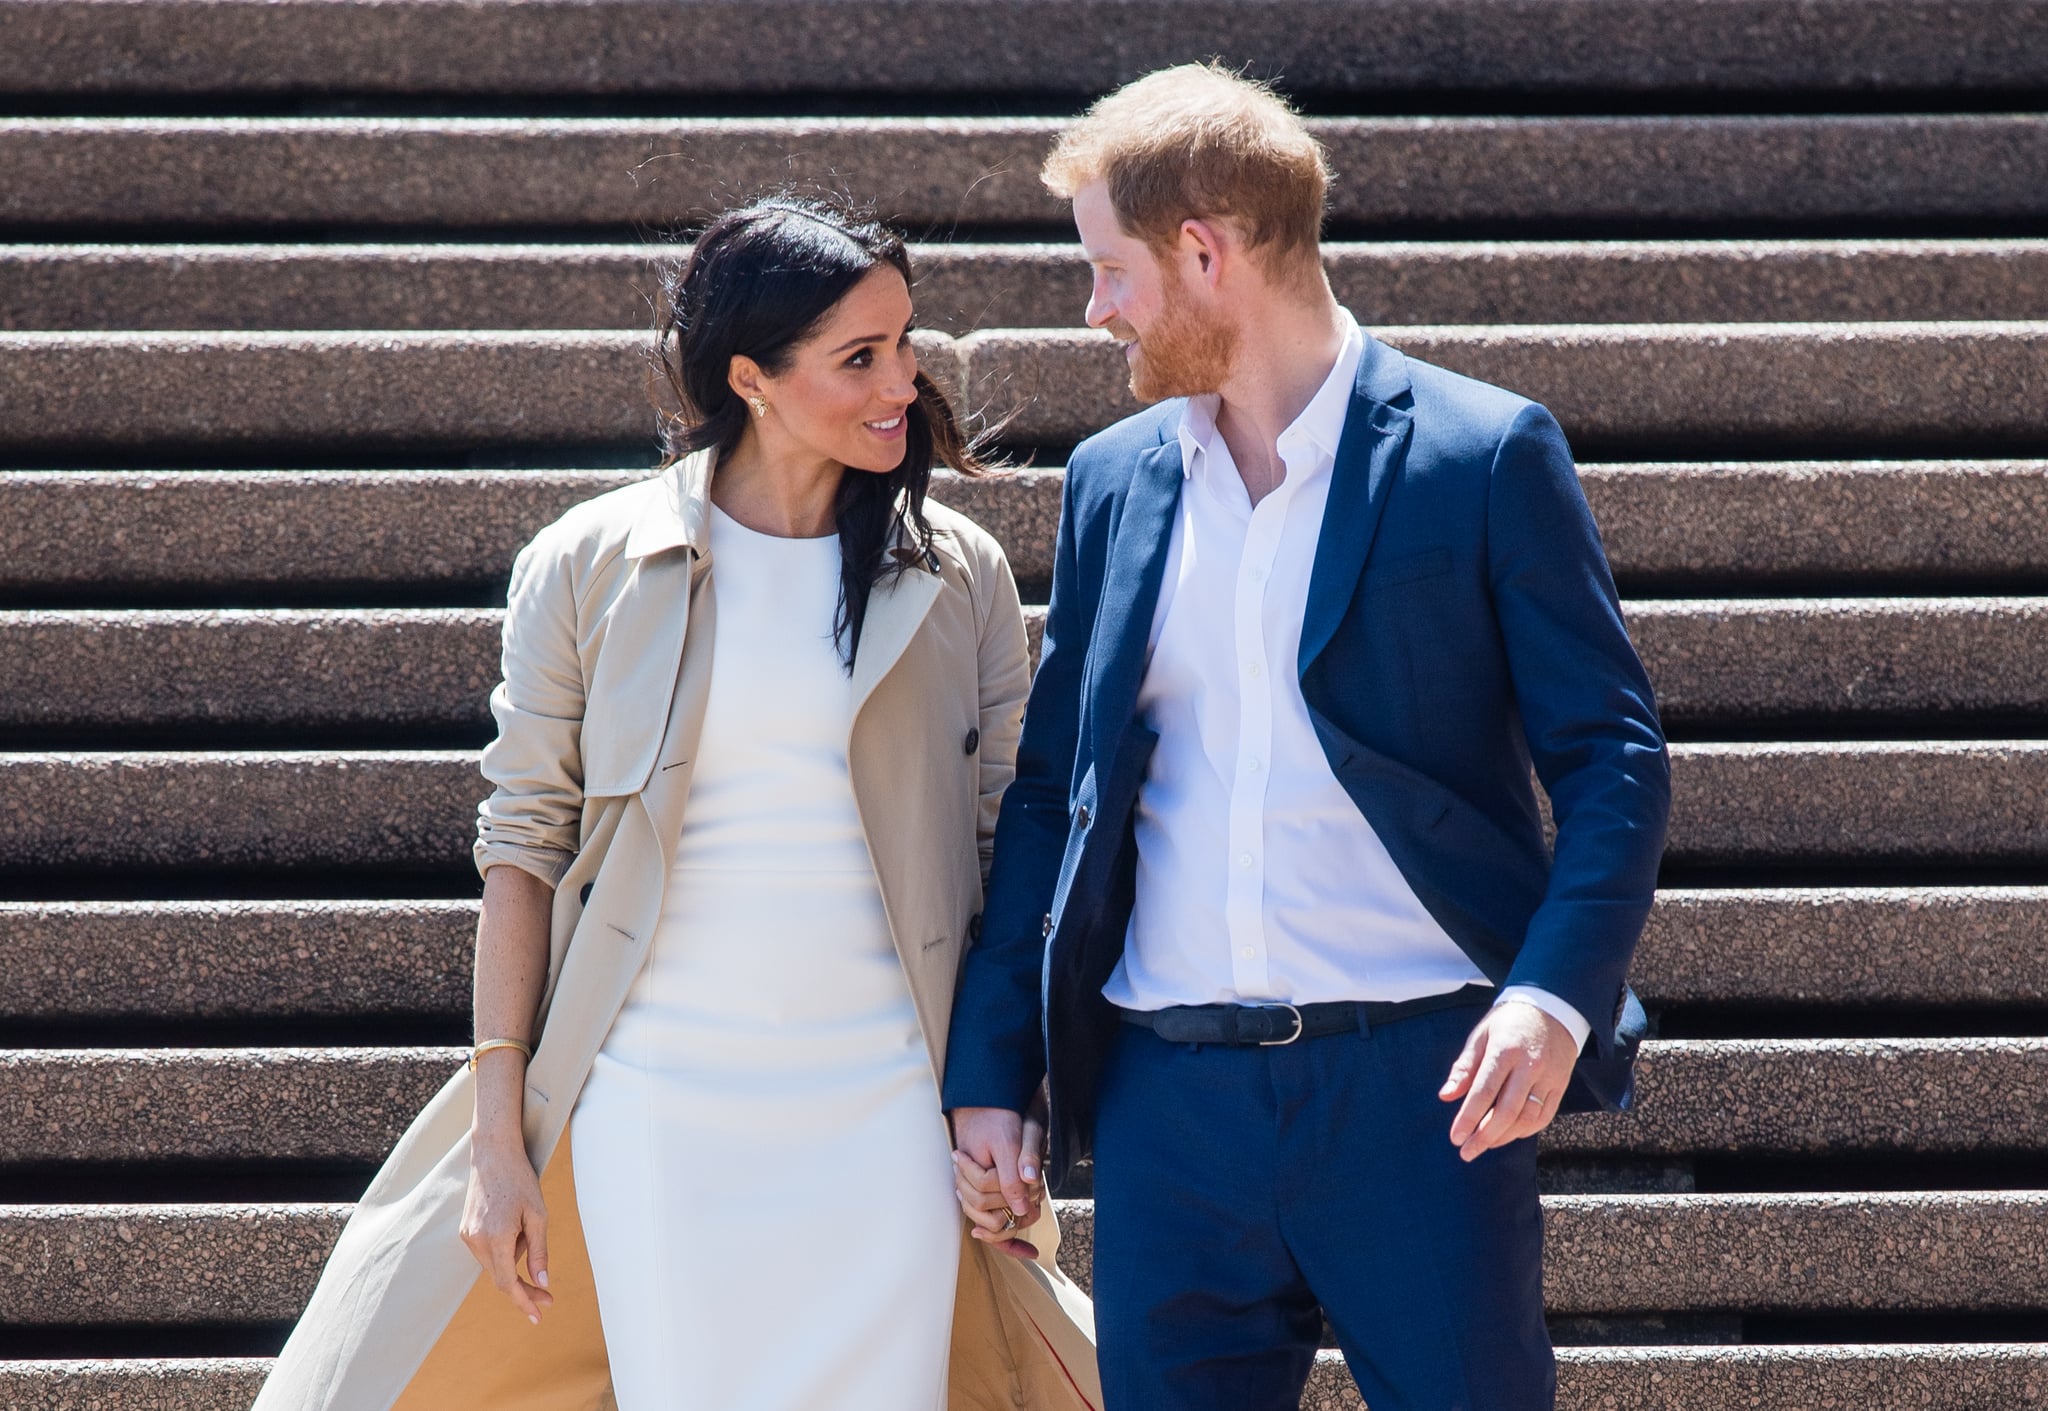 SYDNEY, AUSTRALIA - OCTOBER 16:  Meghan, Duchess of Sussex and Prince Harry, Duke of Sussex take part in a public walkabout at the Sydney Opera House on October 16, 2018 in Sydney, Australia. The Duke and Duchess of Sussex are on their official 16-day Autumn tour visiting cities in Australia, Fiji, Tonga and New Zealand.  (Photo by Samir Hussein/Samir Hussein/WireImage)